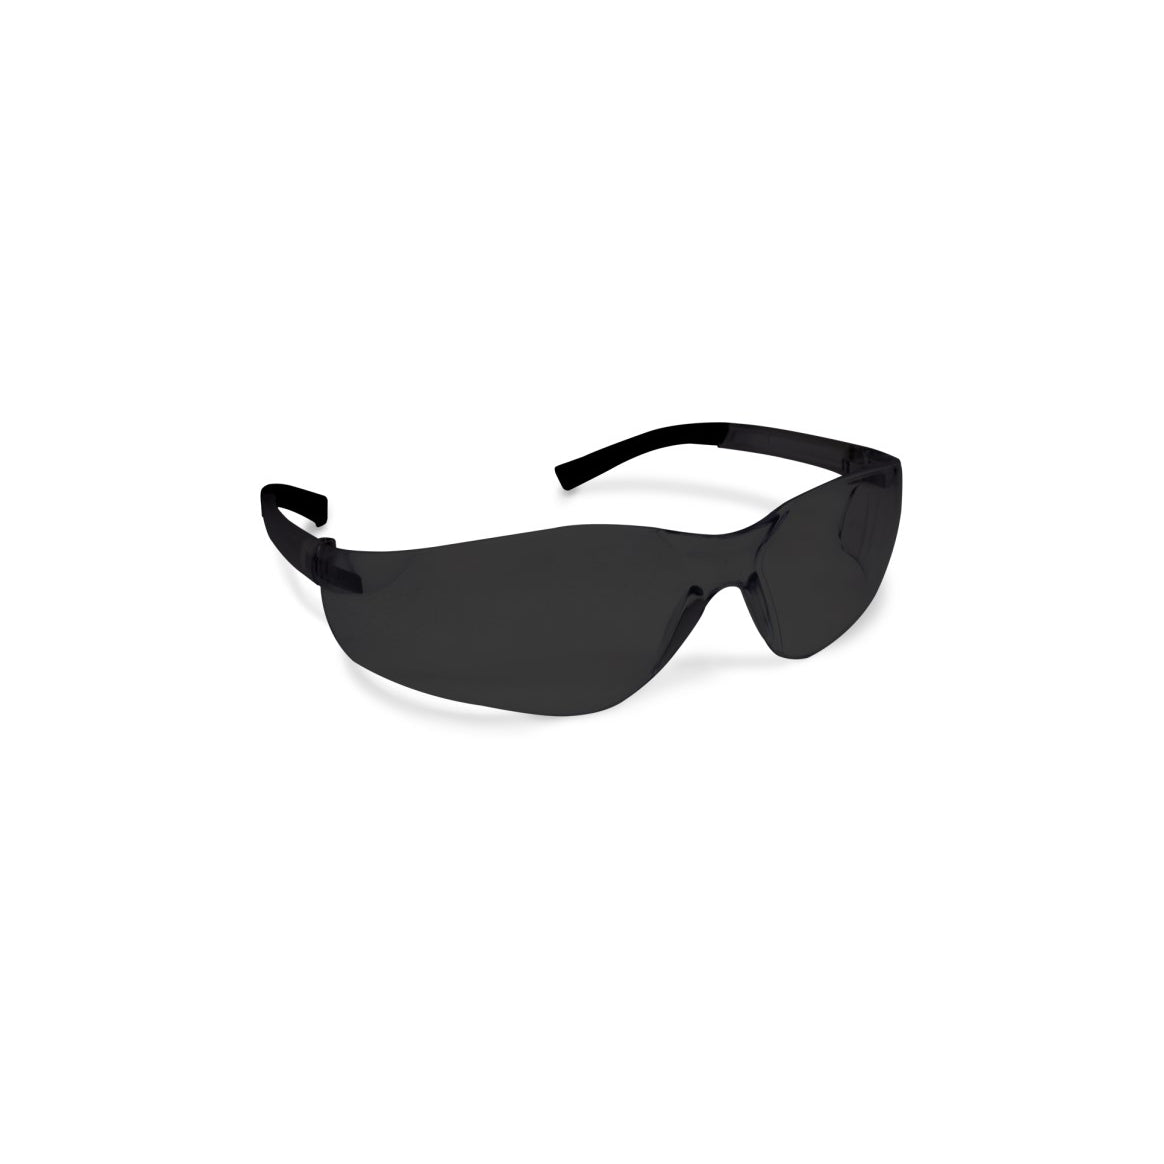 Workhorse® Anti-Fog Safety Glasses, Smoked Lens